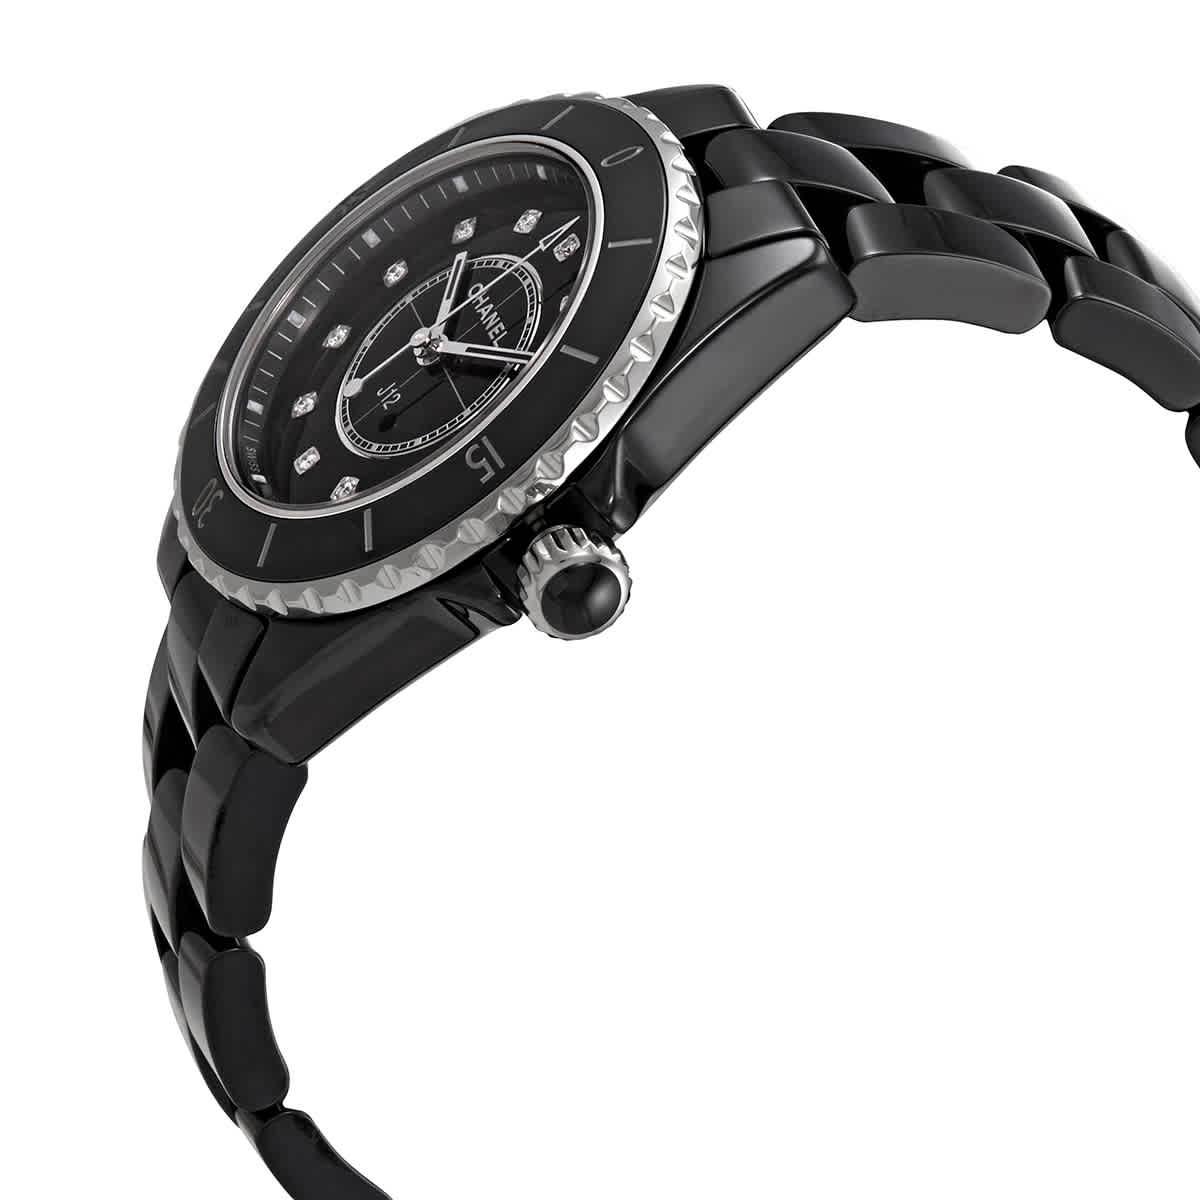 RDC13011 Authentic Chanel Black Ceramic/Steel J12 38mm Watch Caliber 1 –  REAL DEAL COLLECTION